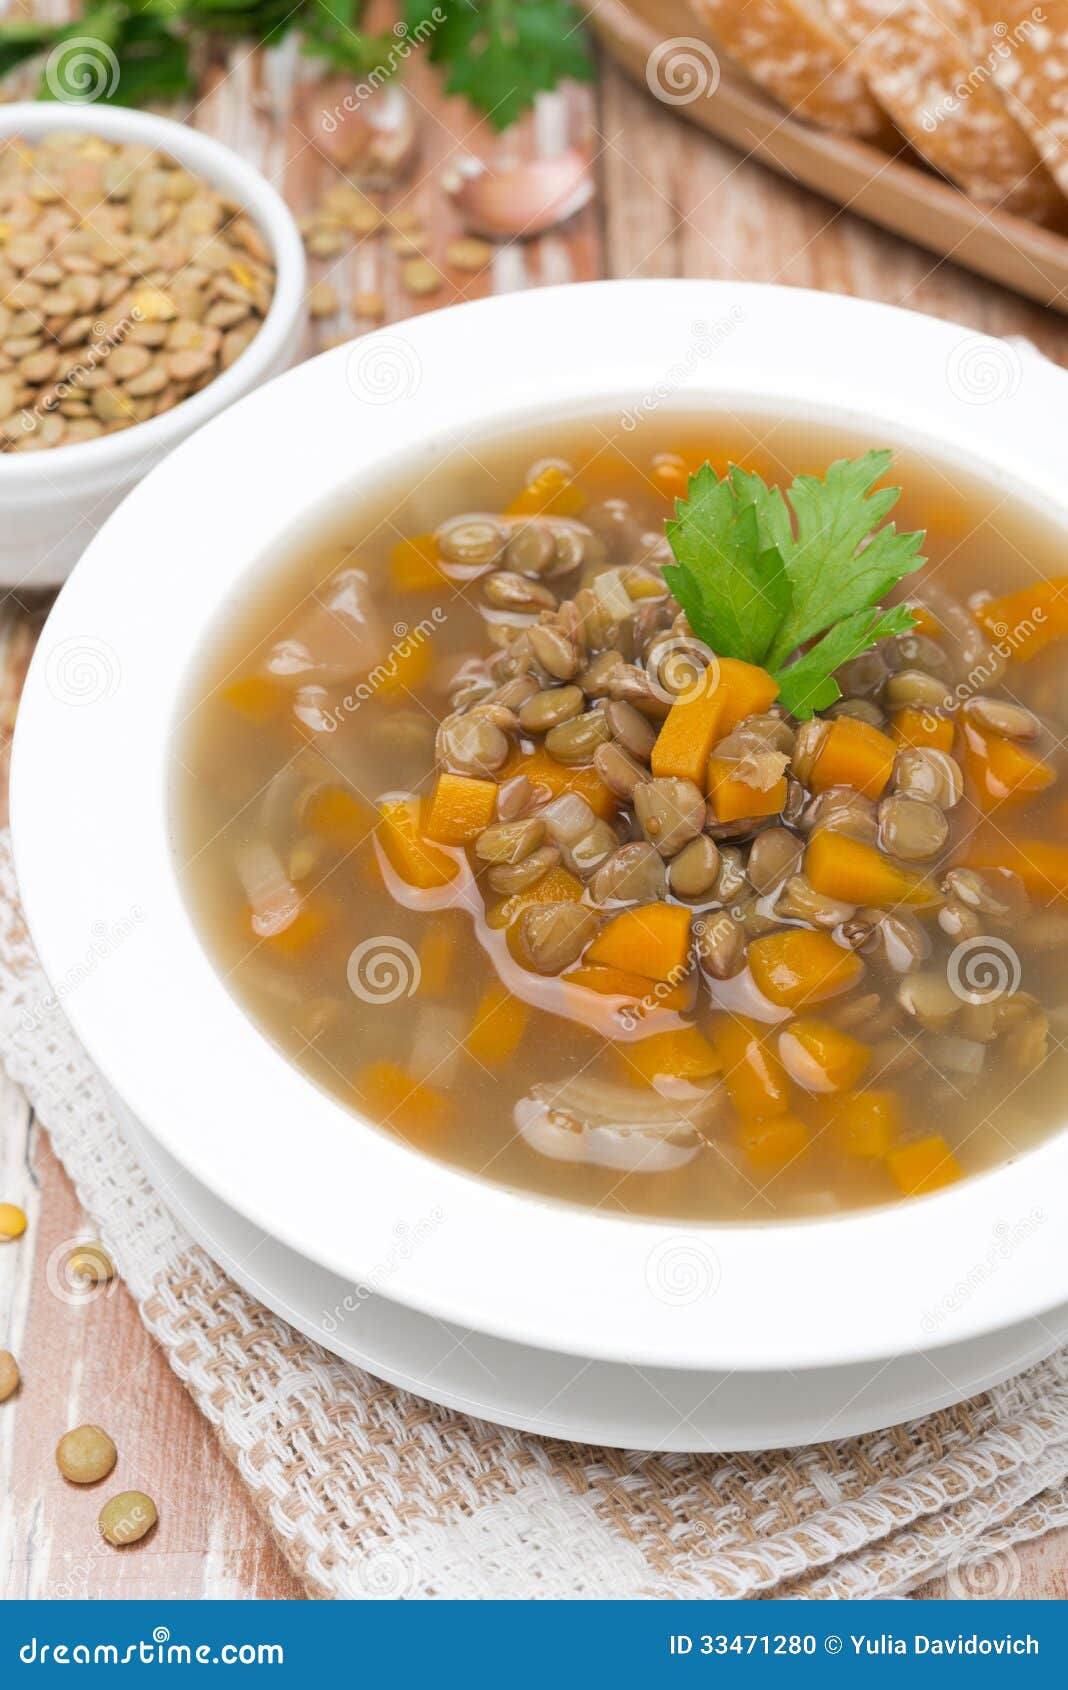 Plate of Vegetable Soup with Lentils, Top View Stock Photo - Image of ...